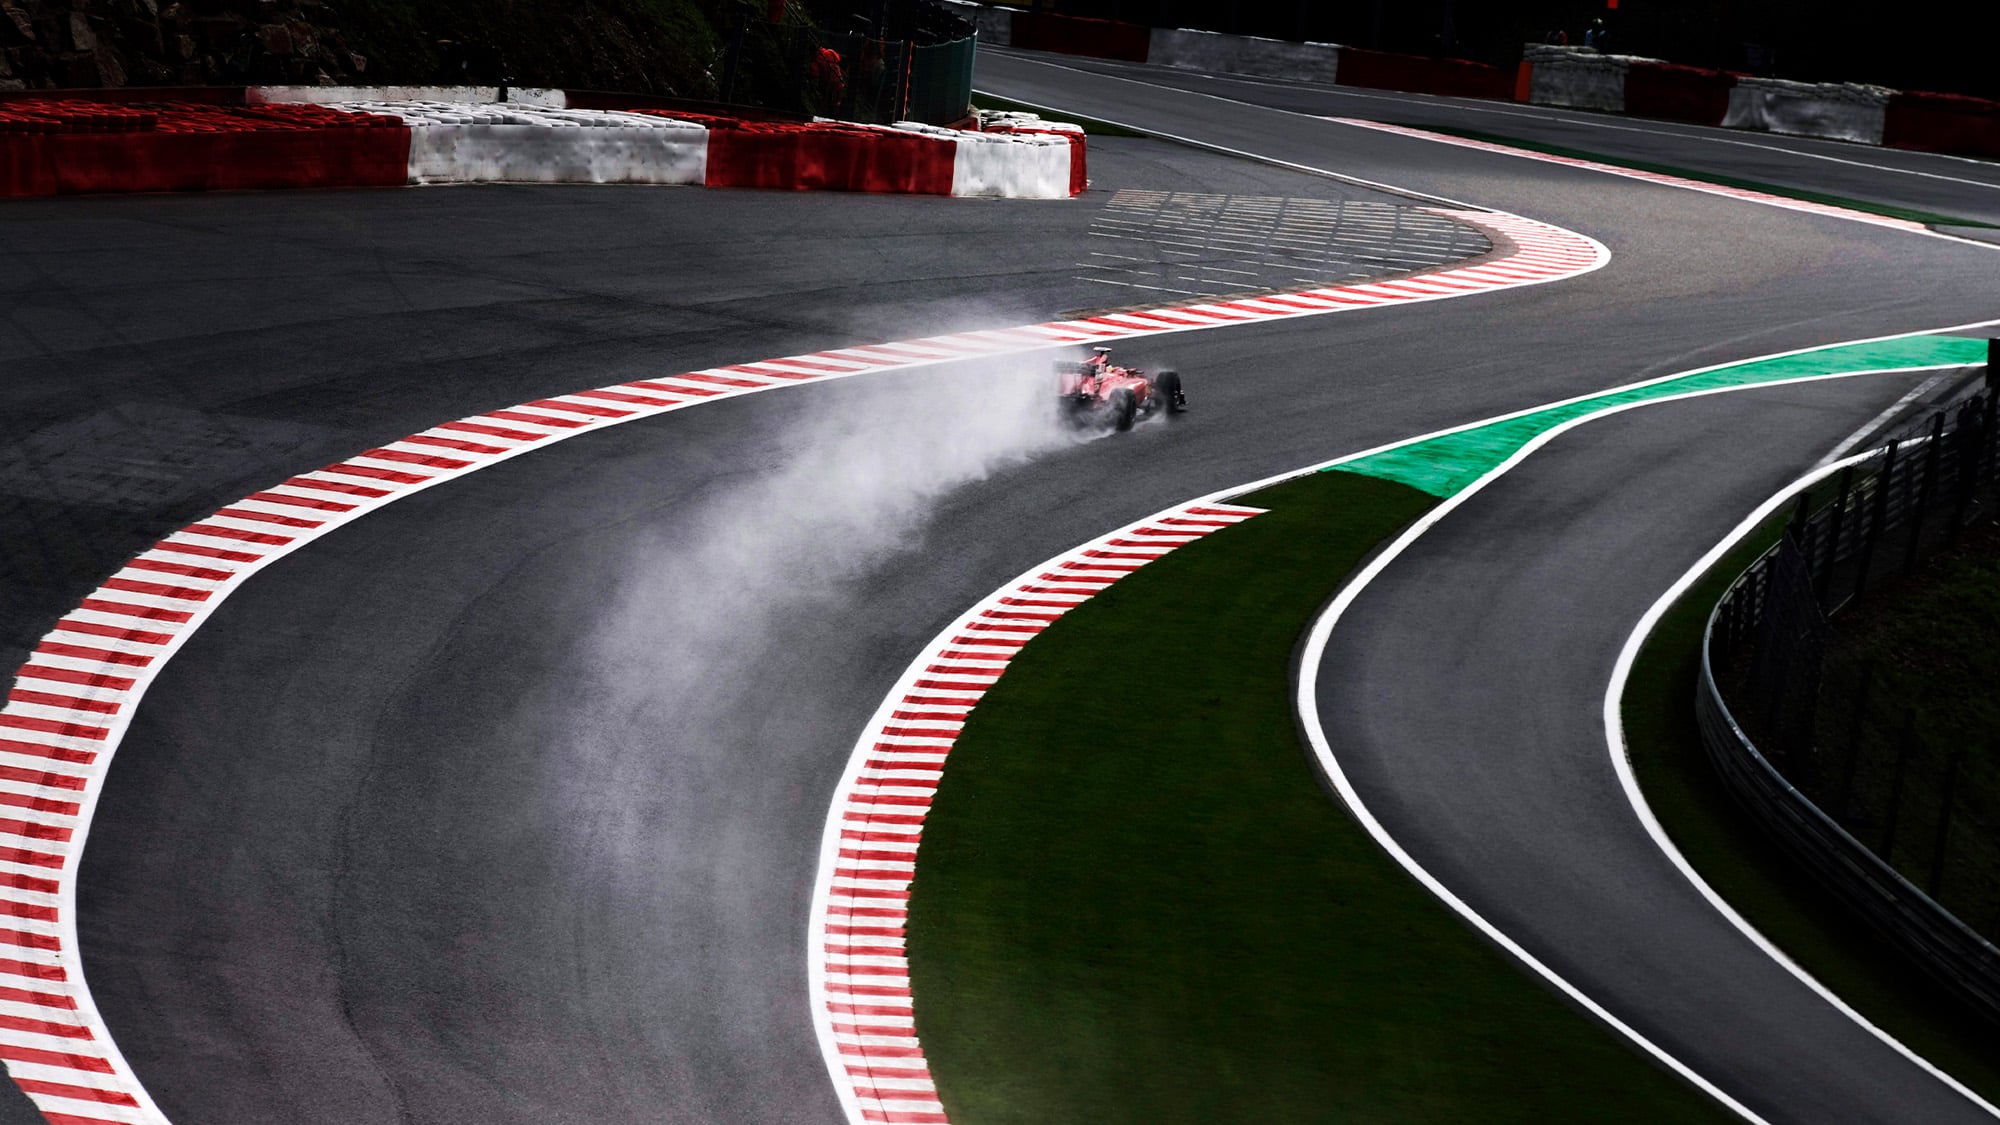 Spas final race for years to come? What to watch for at the 2022 Belgian GP 